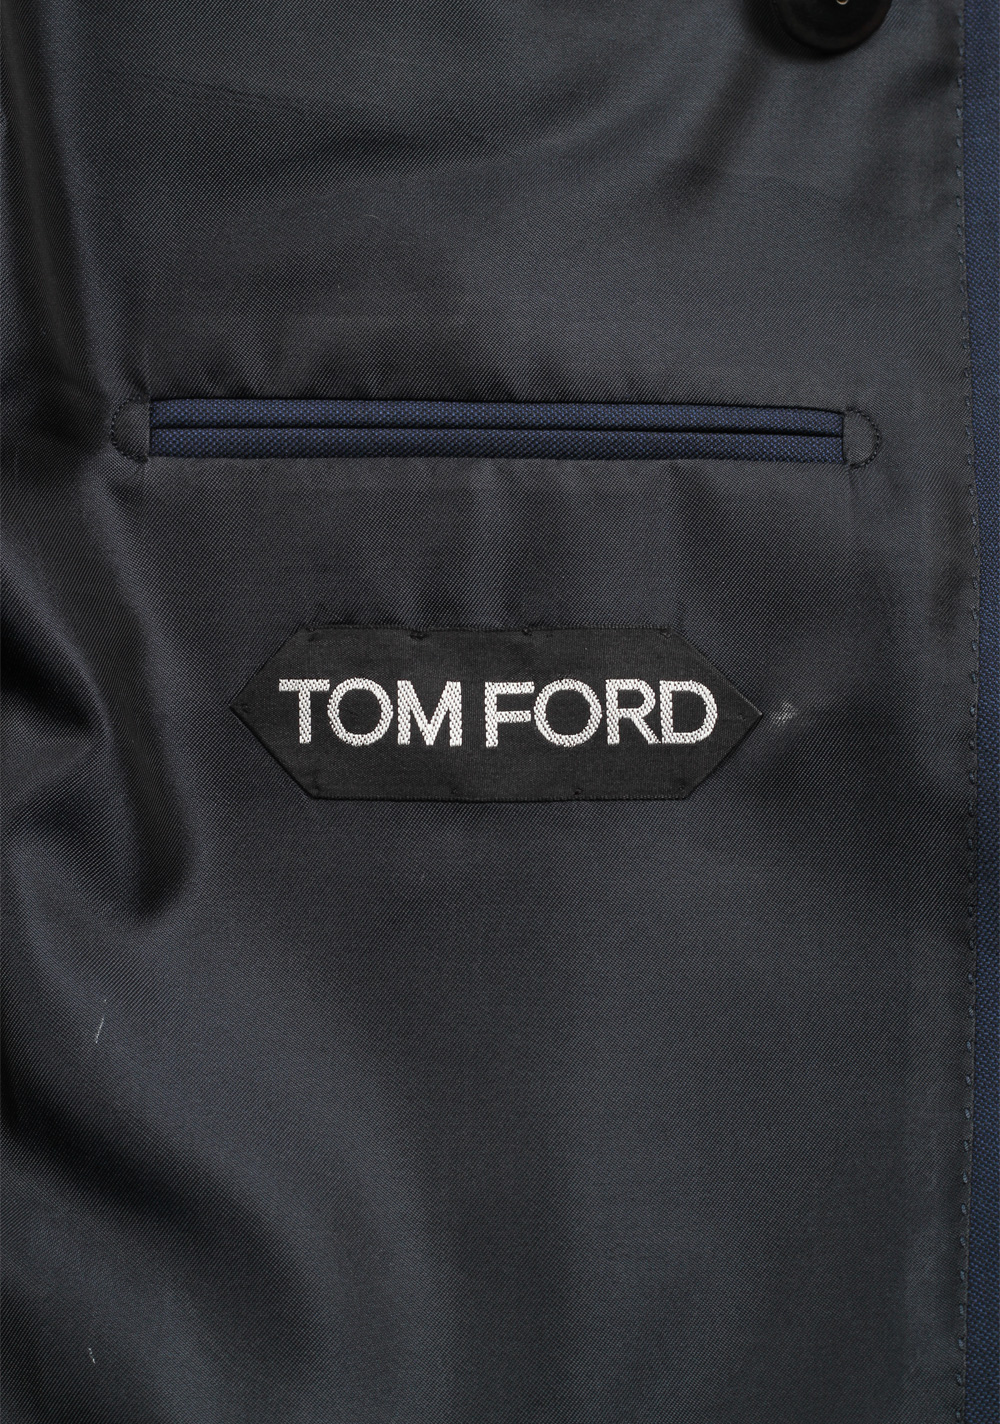 TOM FORD Shelton Solid Blue Double Breasted Suit | Costume Limité